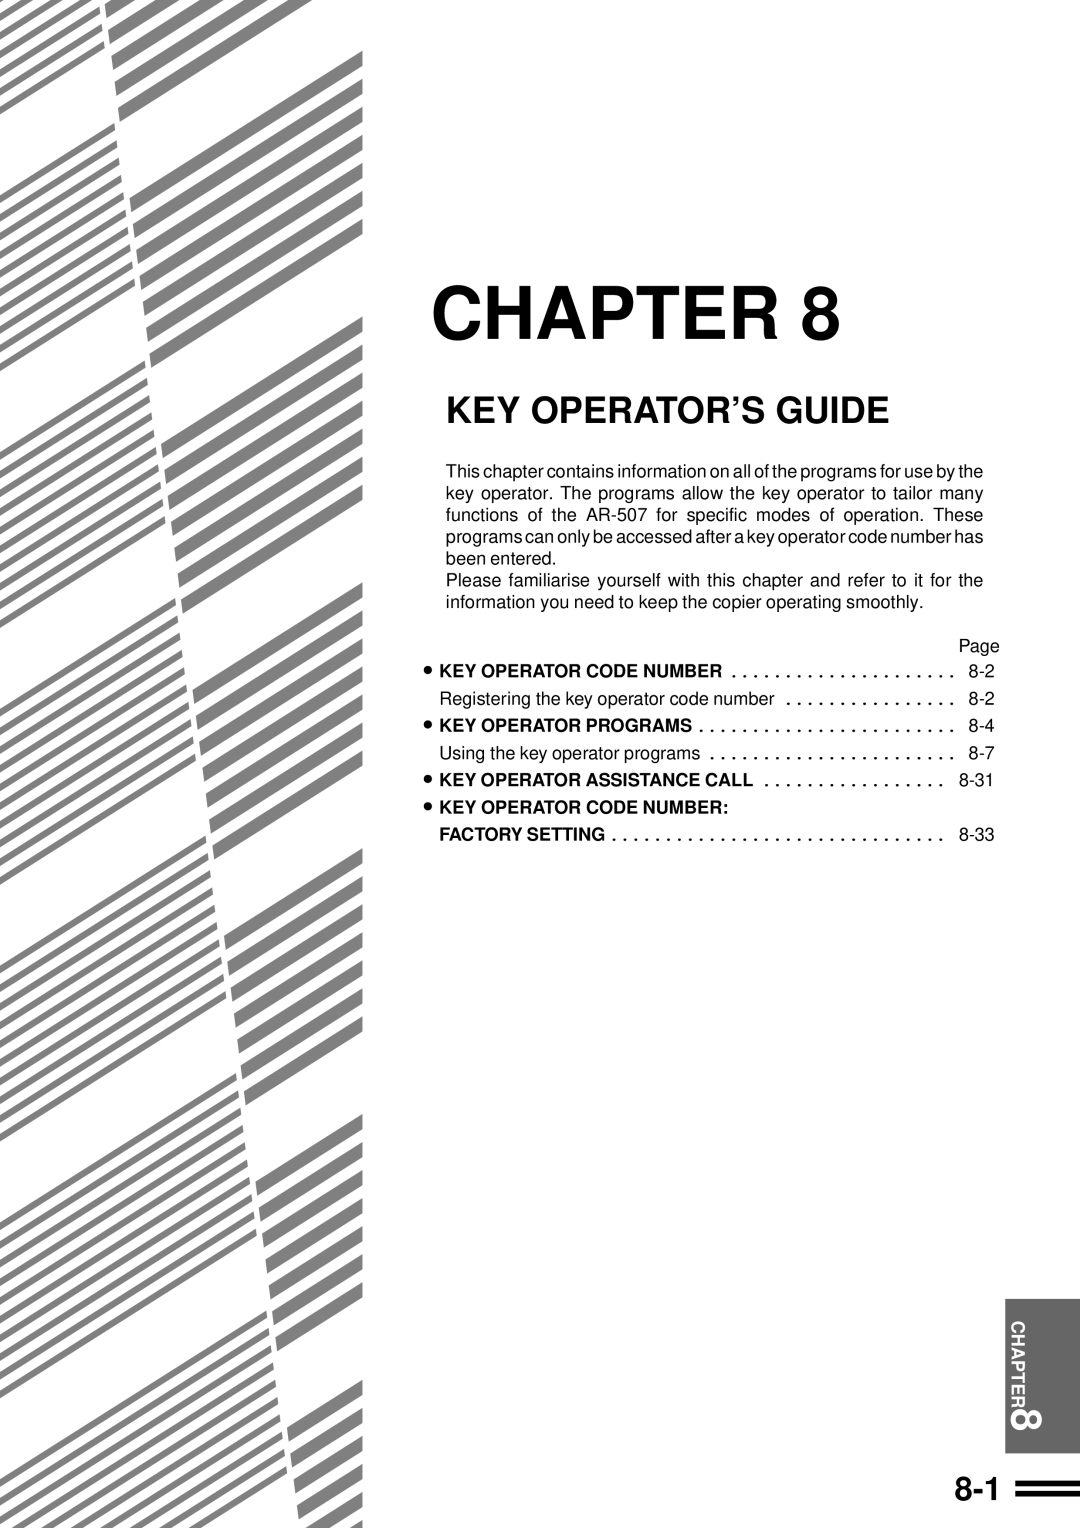 Sharp AR-507 Key Operator’S Guide, Chapter, Key Operator Code Number, Key Operator Programs, Key Operator Assistance Call 